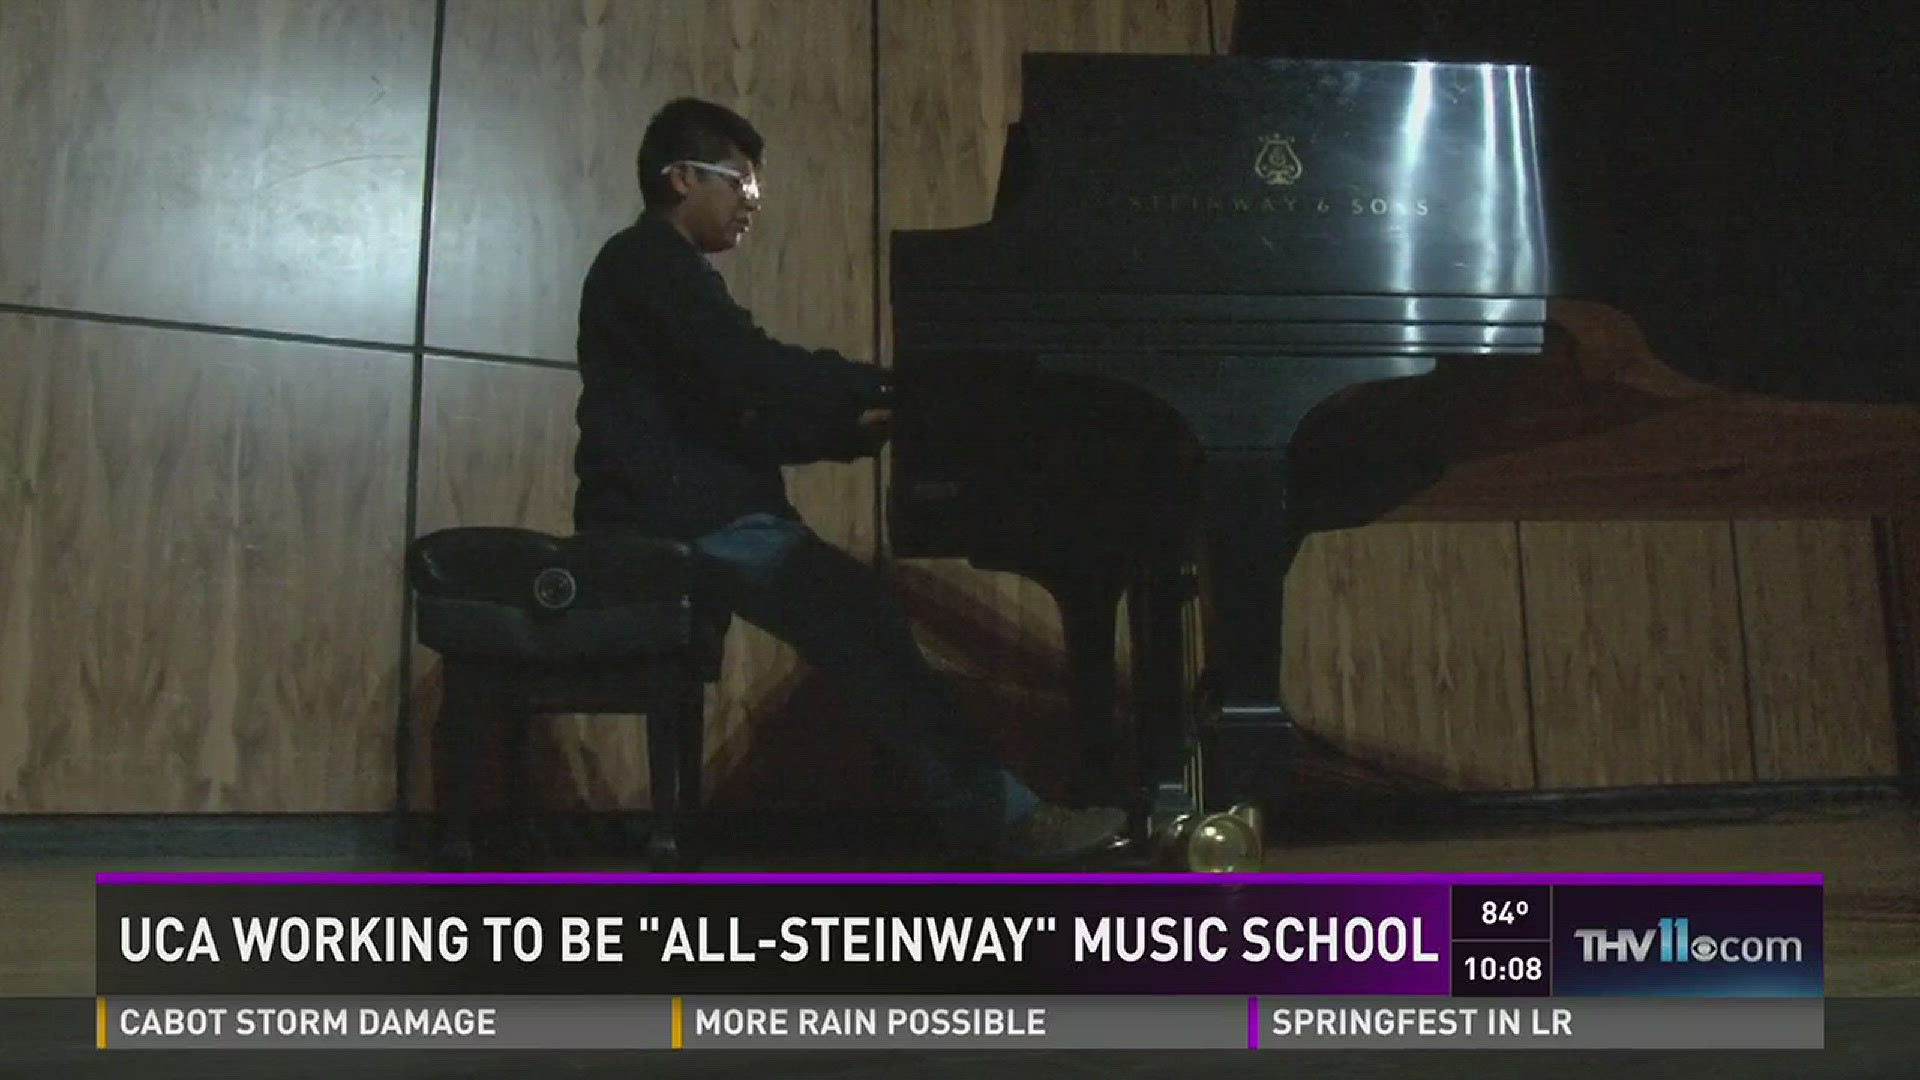 A fundraising event at UCA was held in hopes to earn enough to buy 43 new Steinway pianos